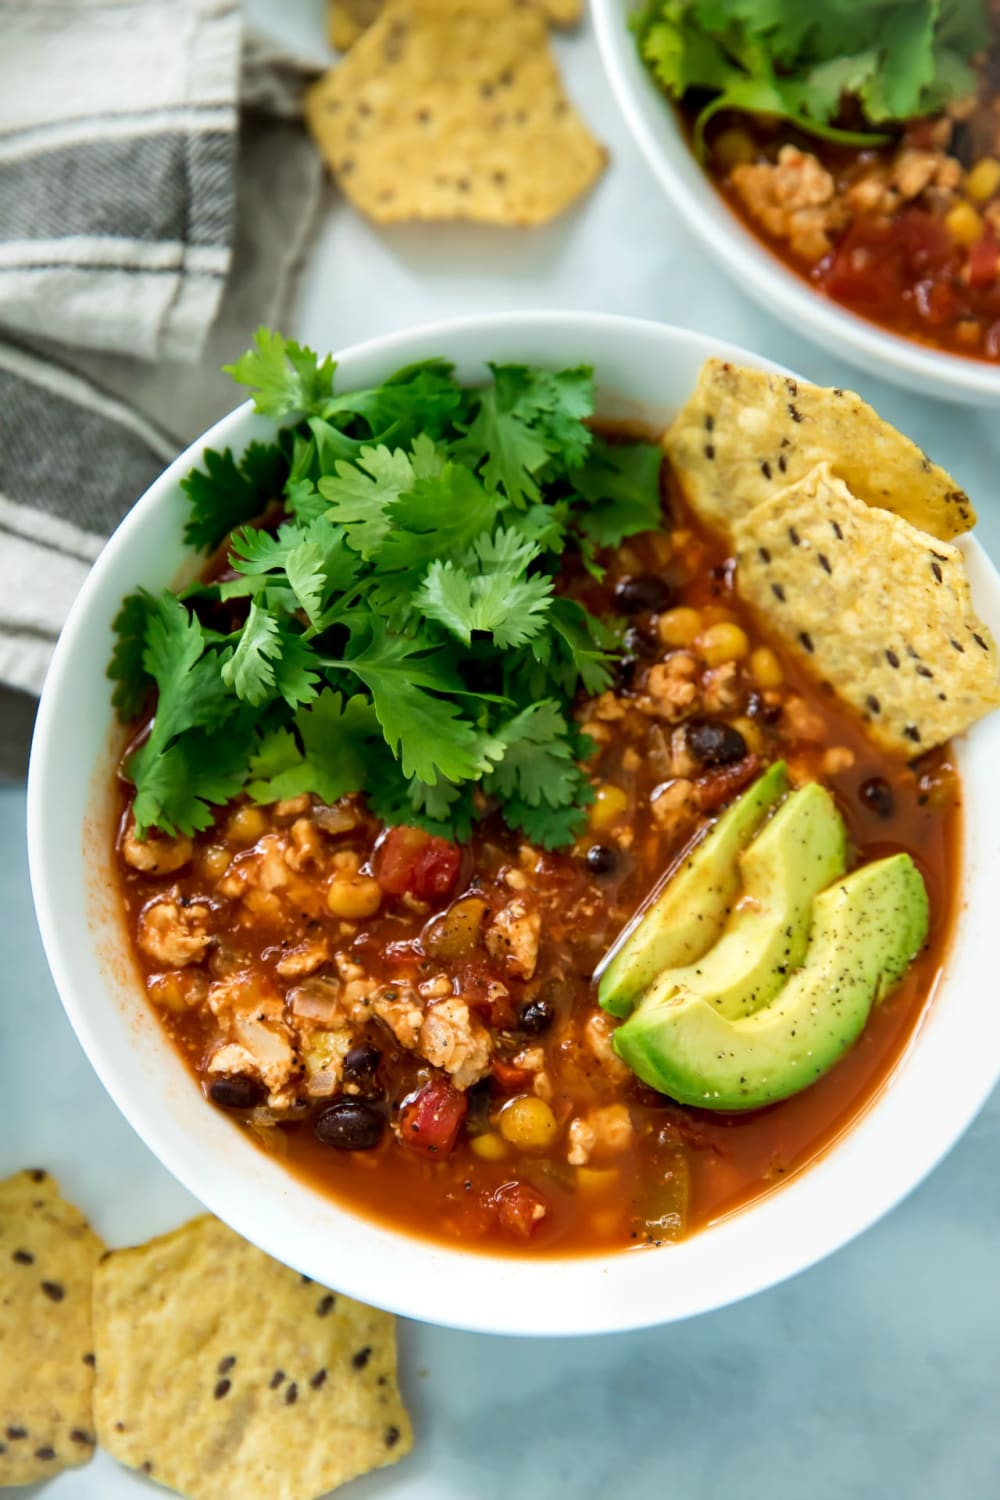 Healthy taco soup - beyond delicious and so quick and easy!